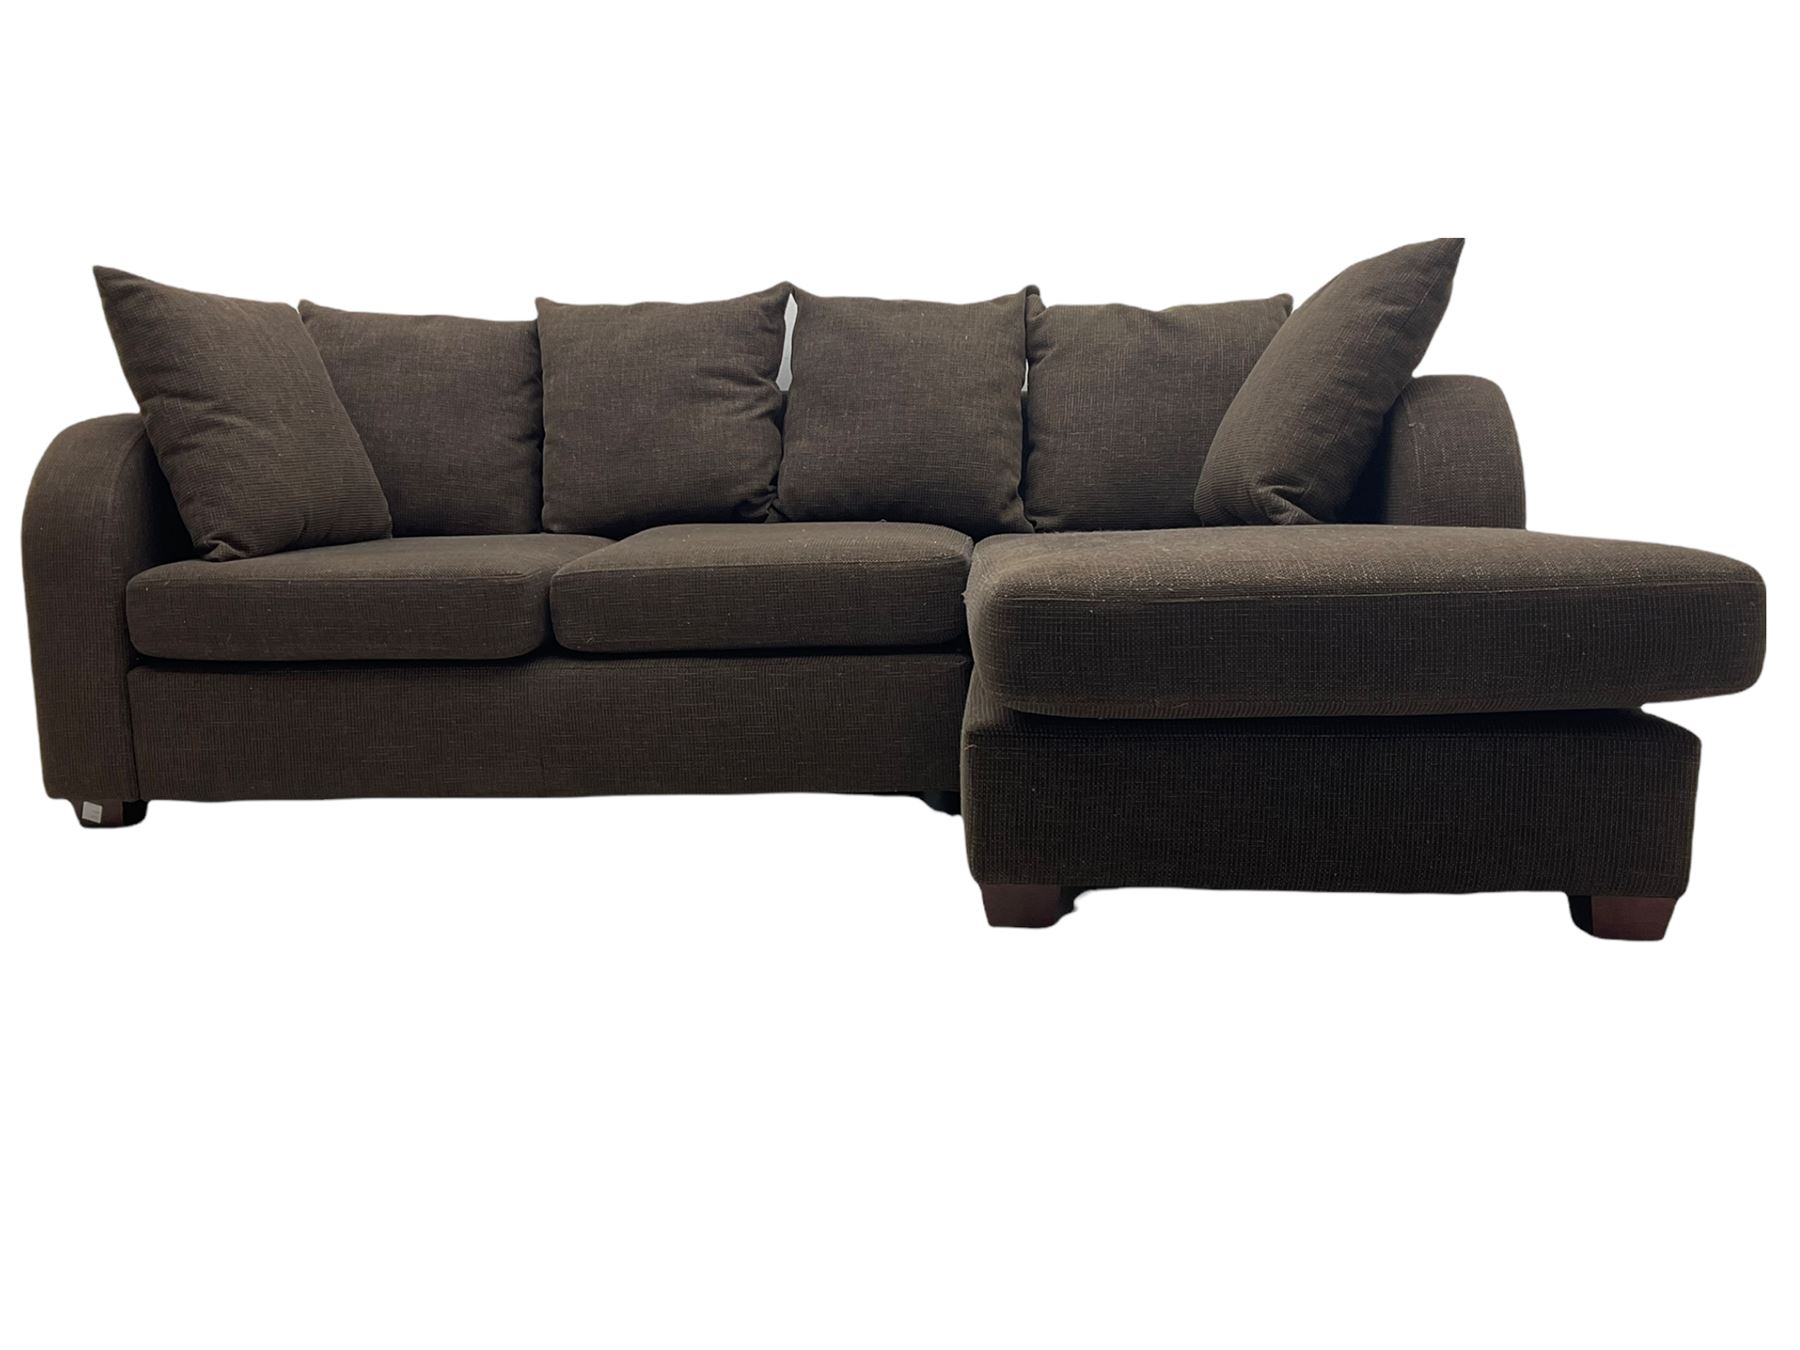 Corner sofa with right hand chaise - Image 3 of 8